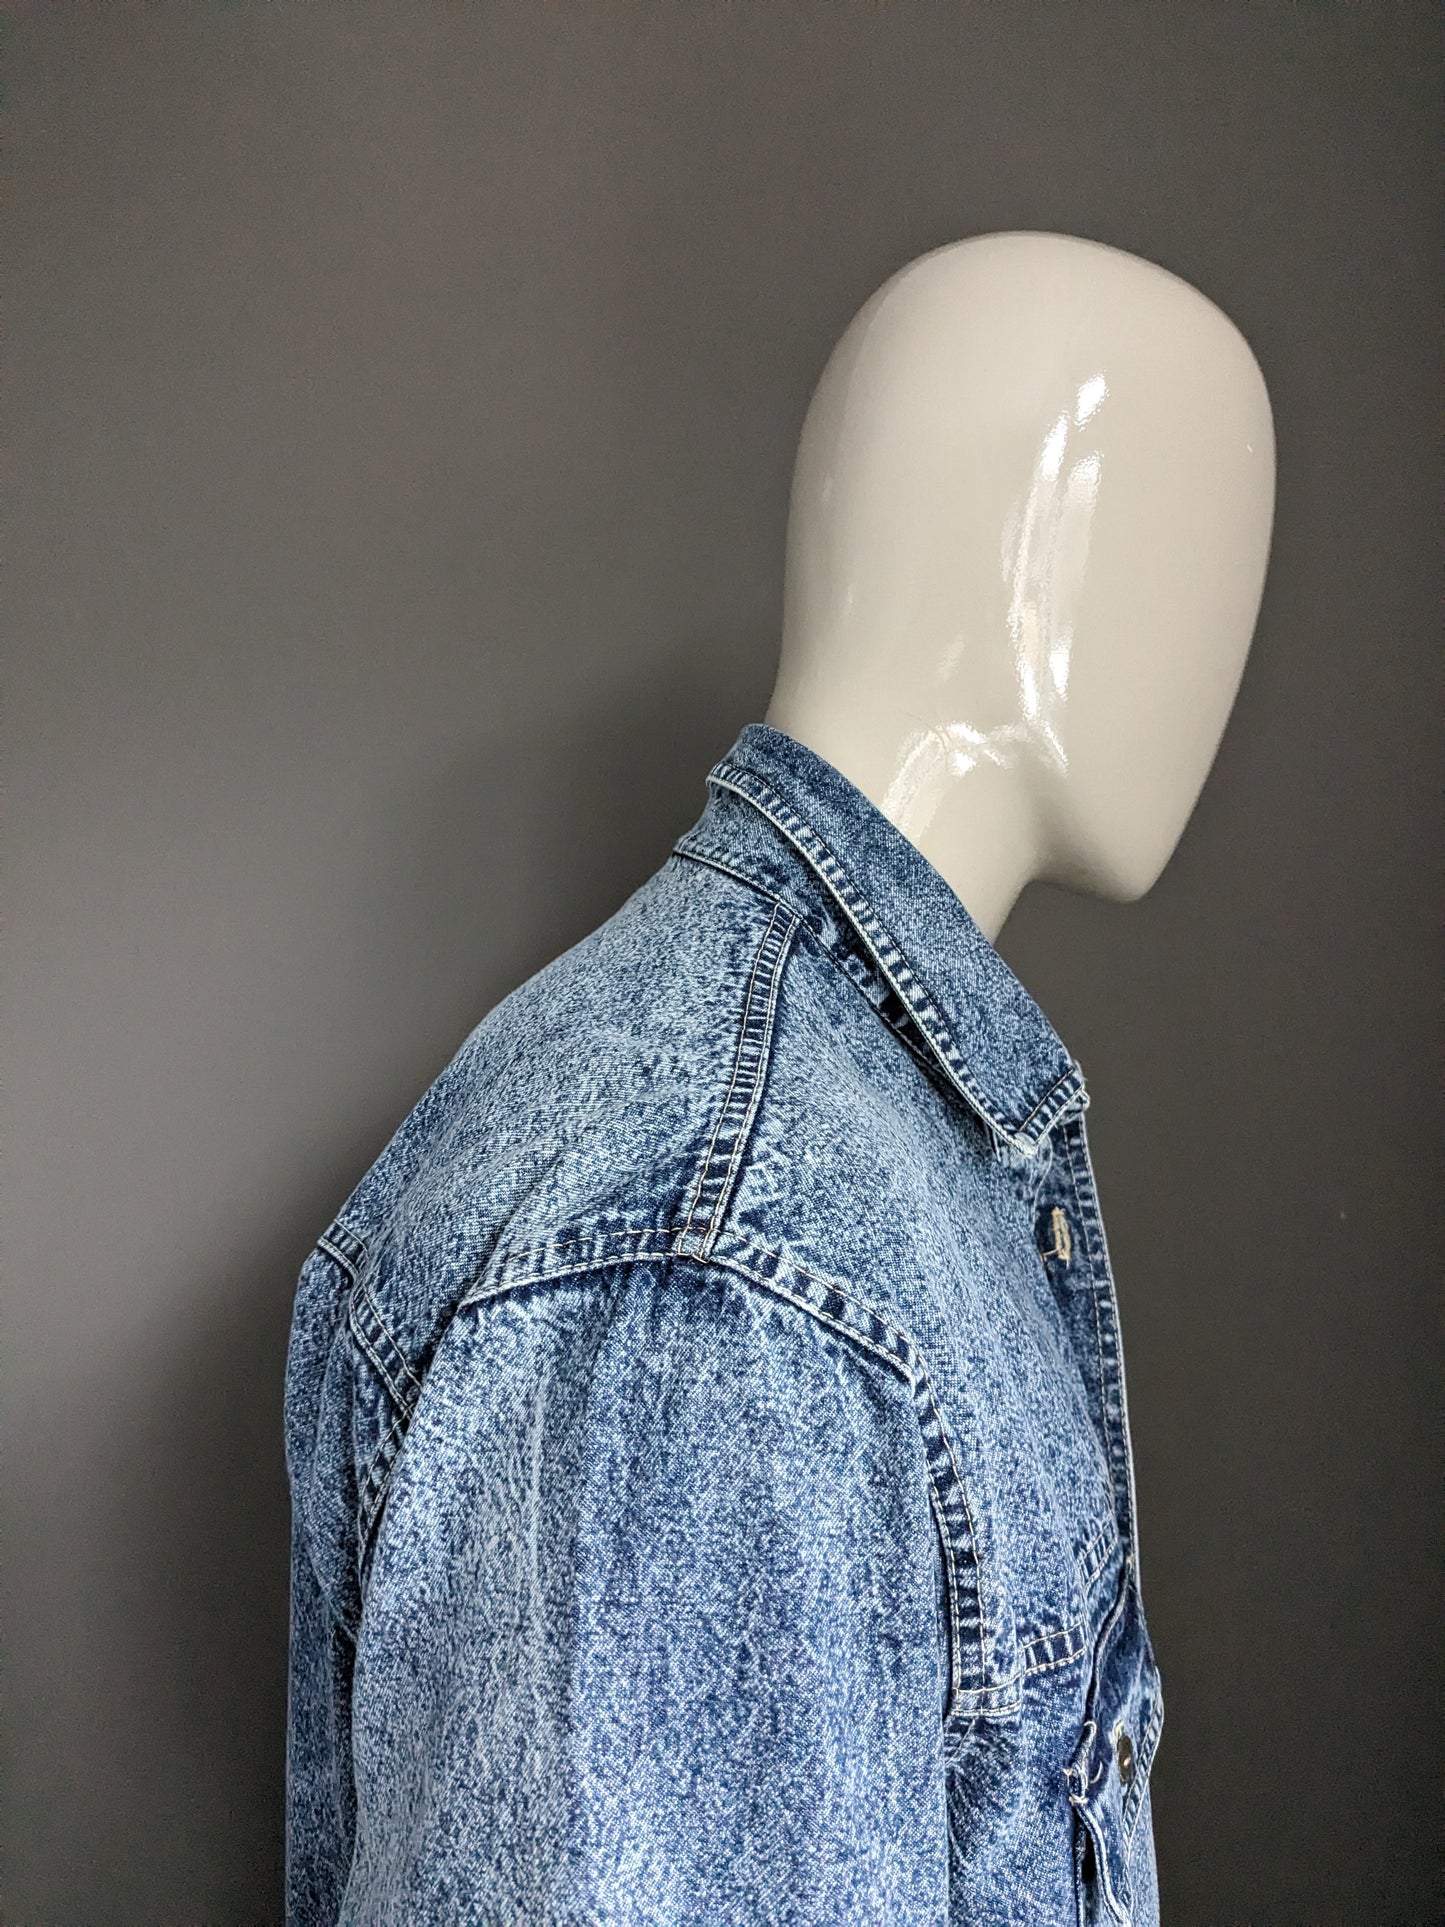 Vintage fimse jeans shirt thicker fabric. Blue mixed. Size L.